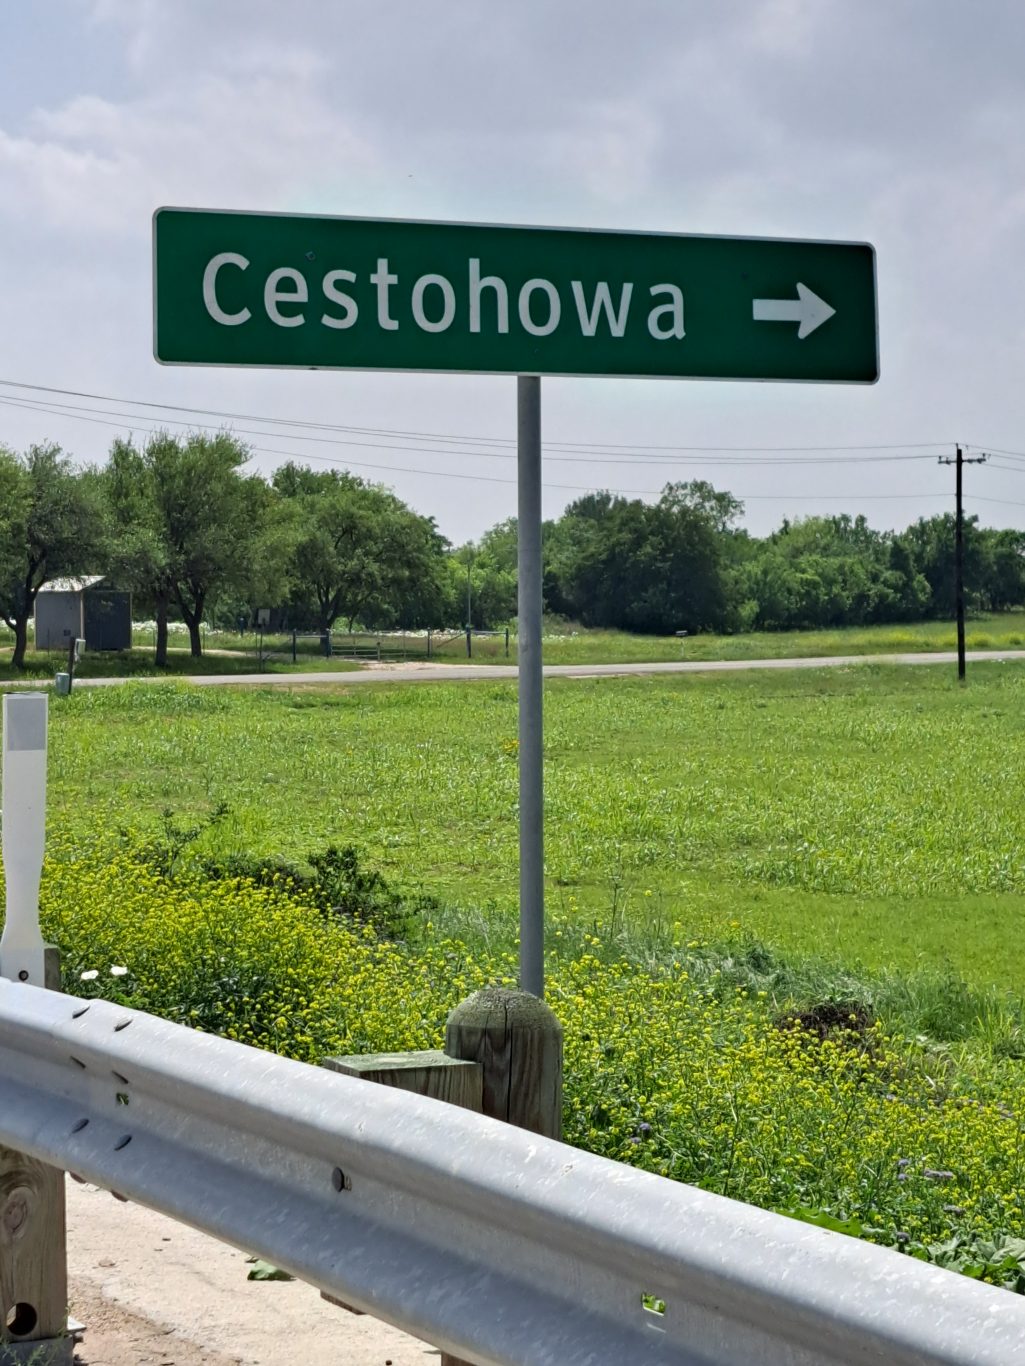 Entrance to the town of Cestohowa, Texas, one of the settlements of the Polish pioneers in Texas. Photo: Alex Fleites.